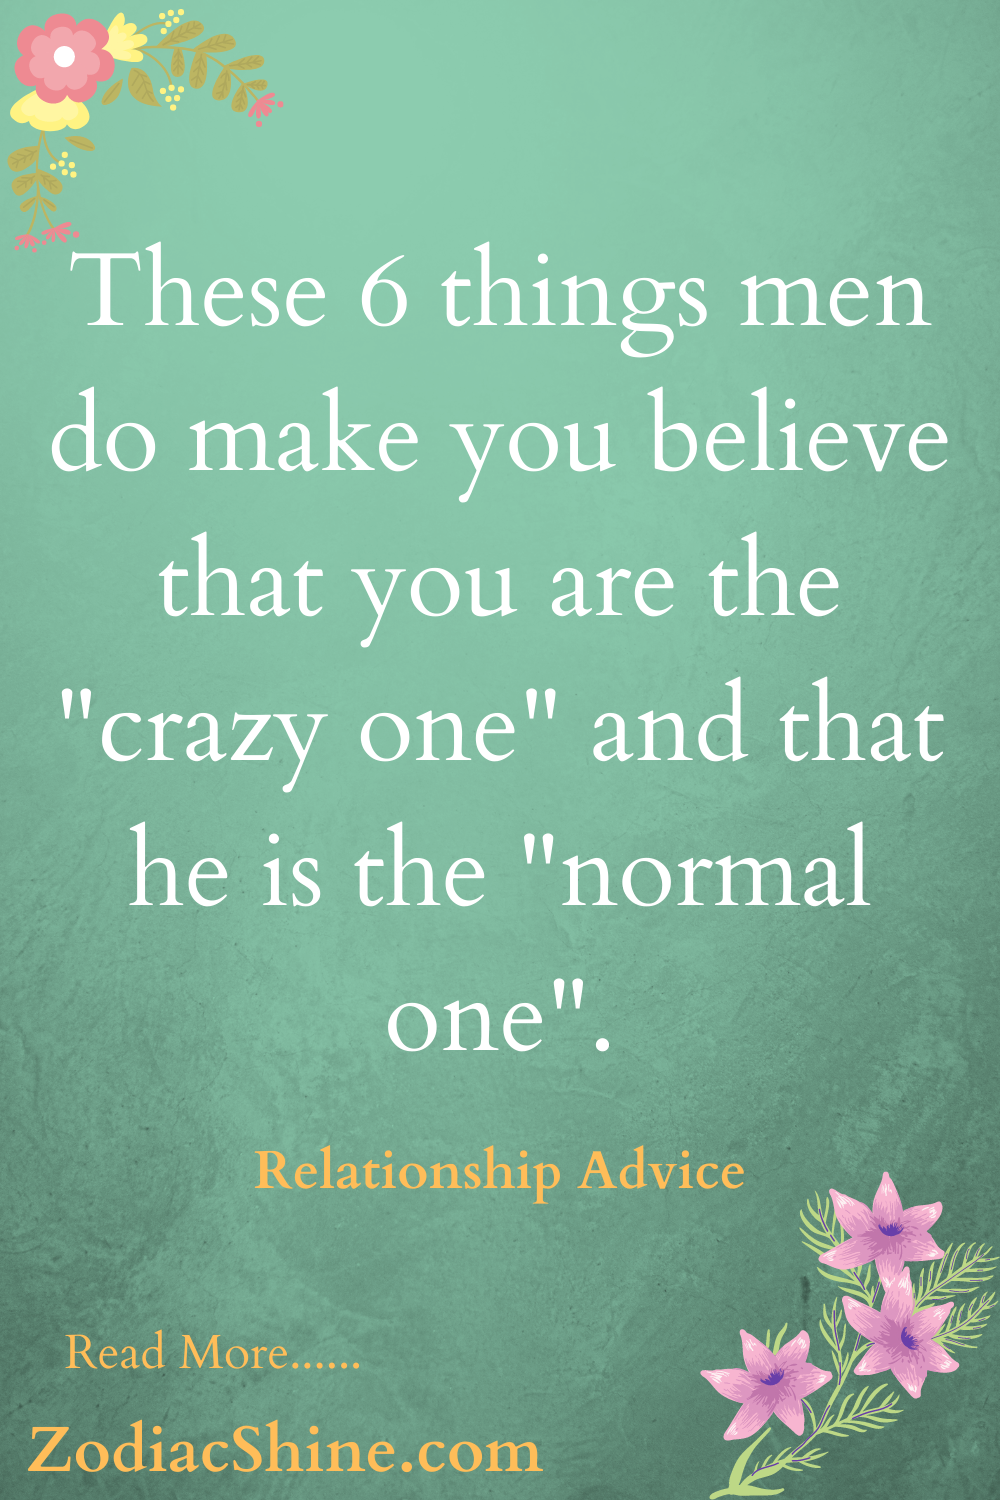 These 6 things men do make you believe that you are the "crazy one" and that he is the "normal one".